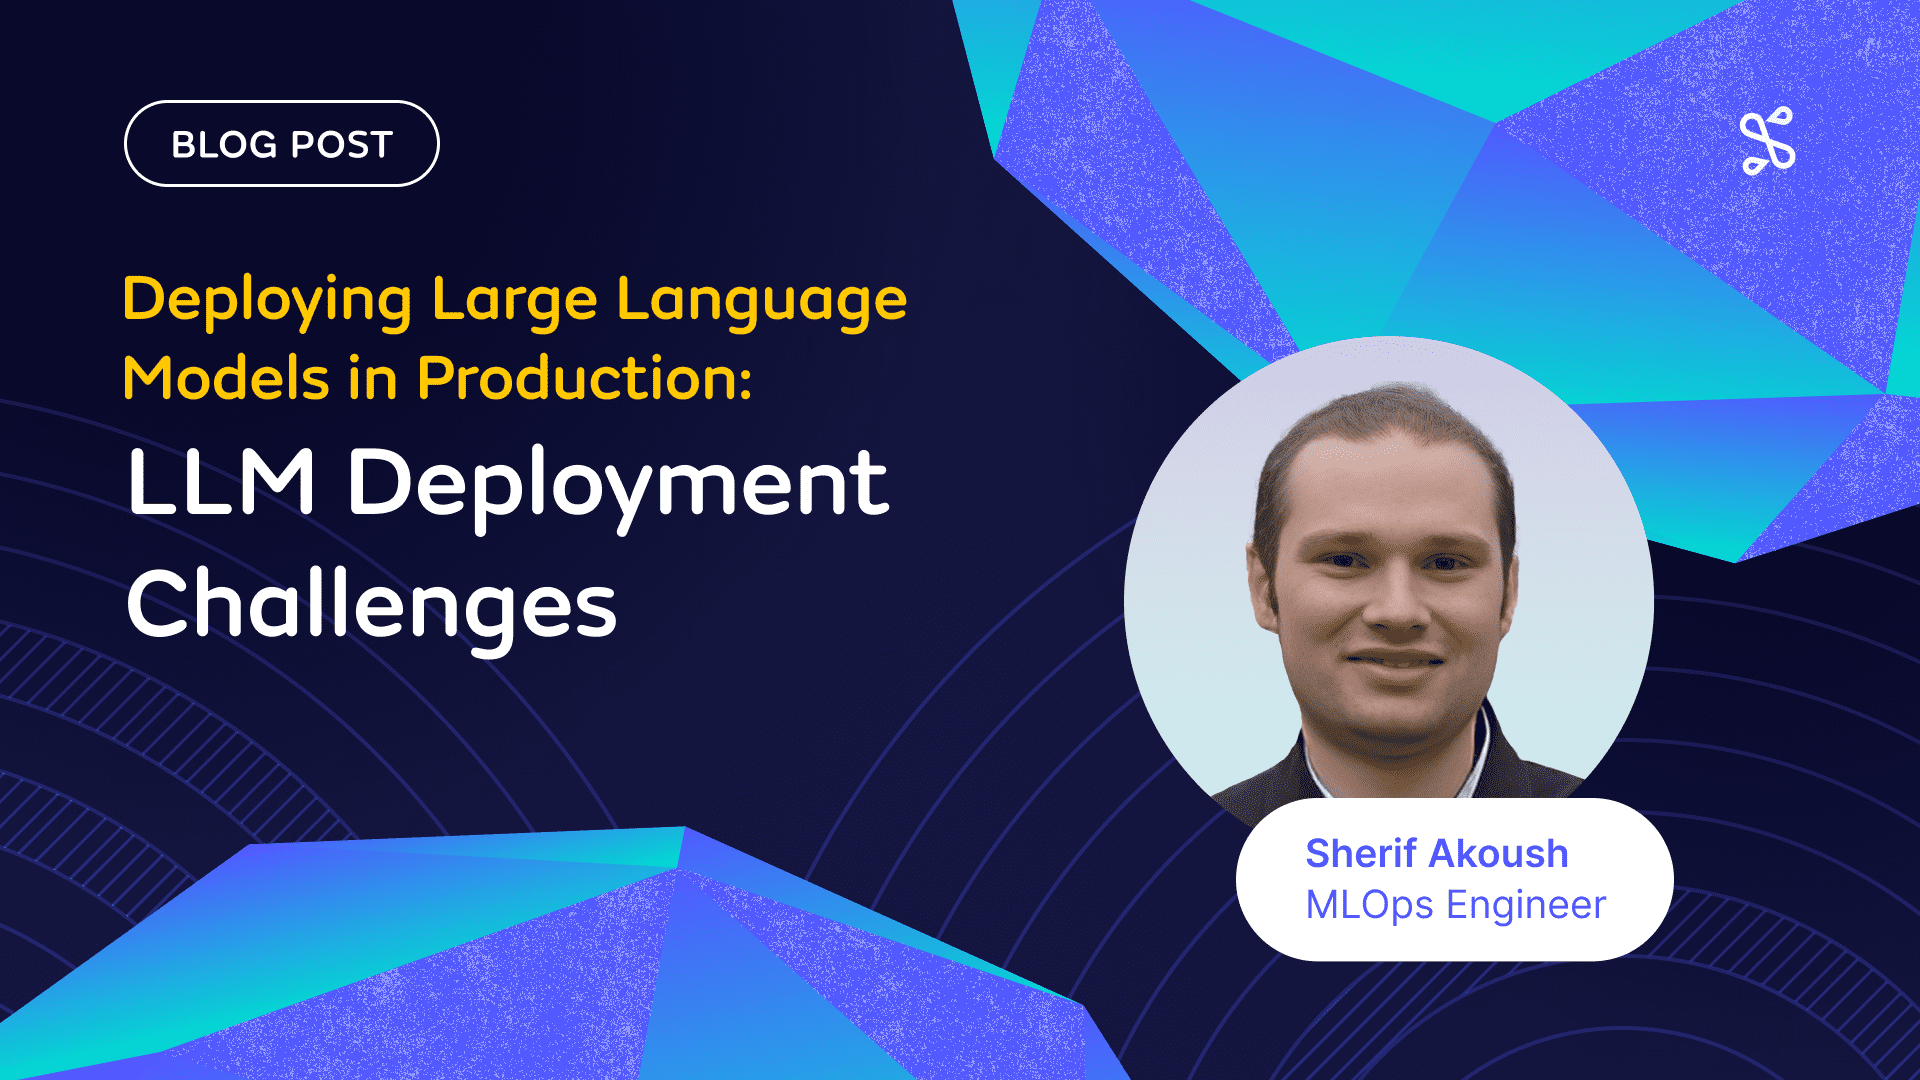 Deploying Large Language Models in Production: LLM Deployment Challenges